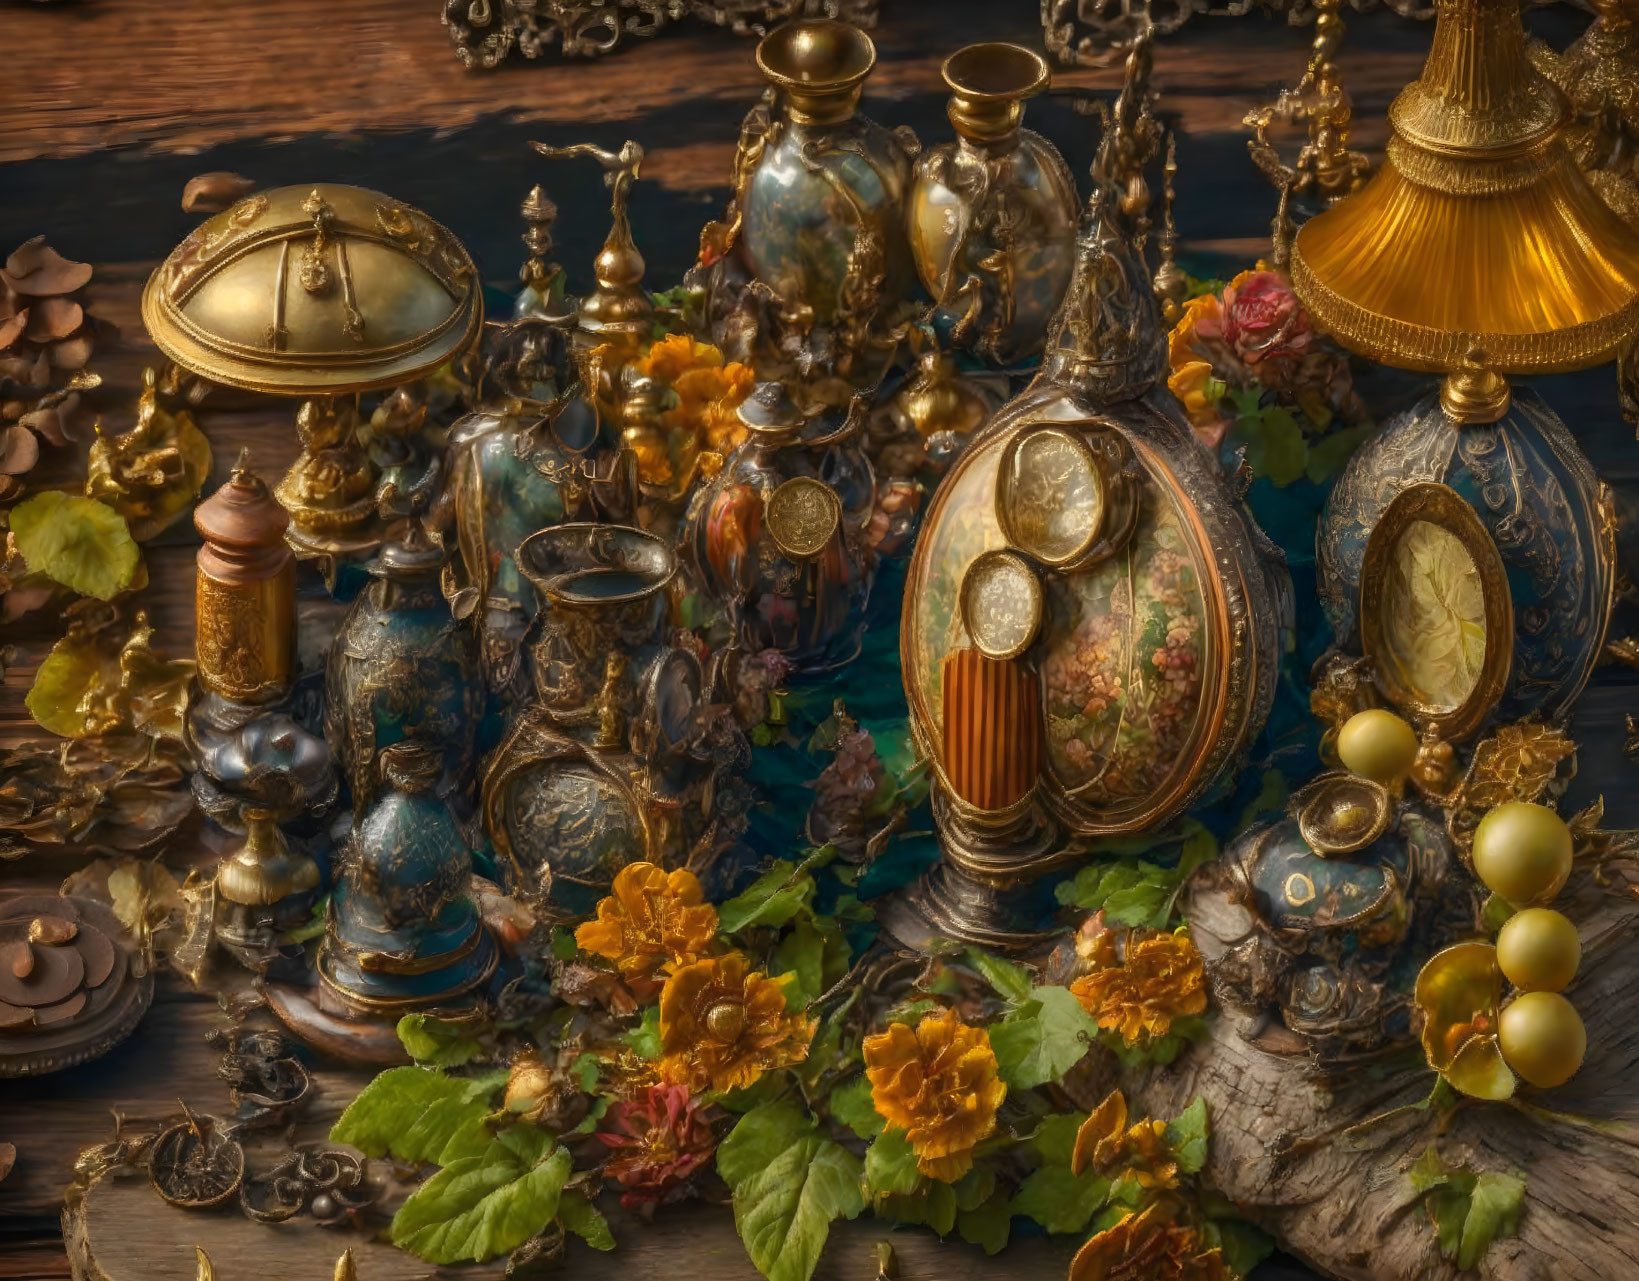 Assortment of antique lamps, vases, and goblets on rustic wooden backdrop